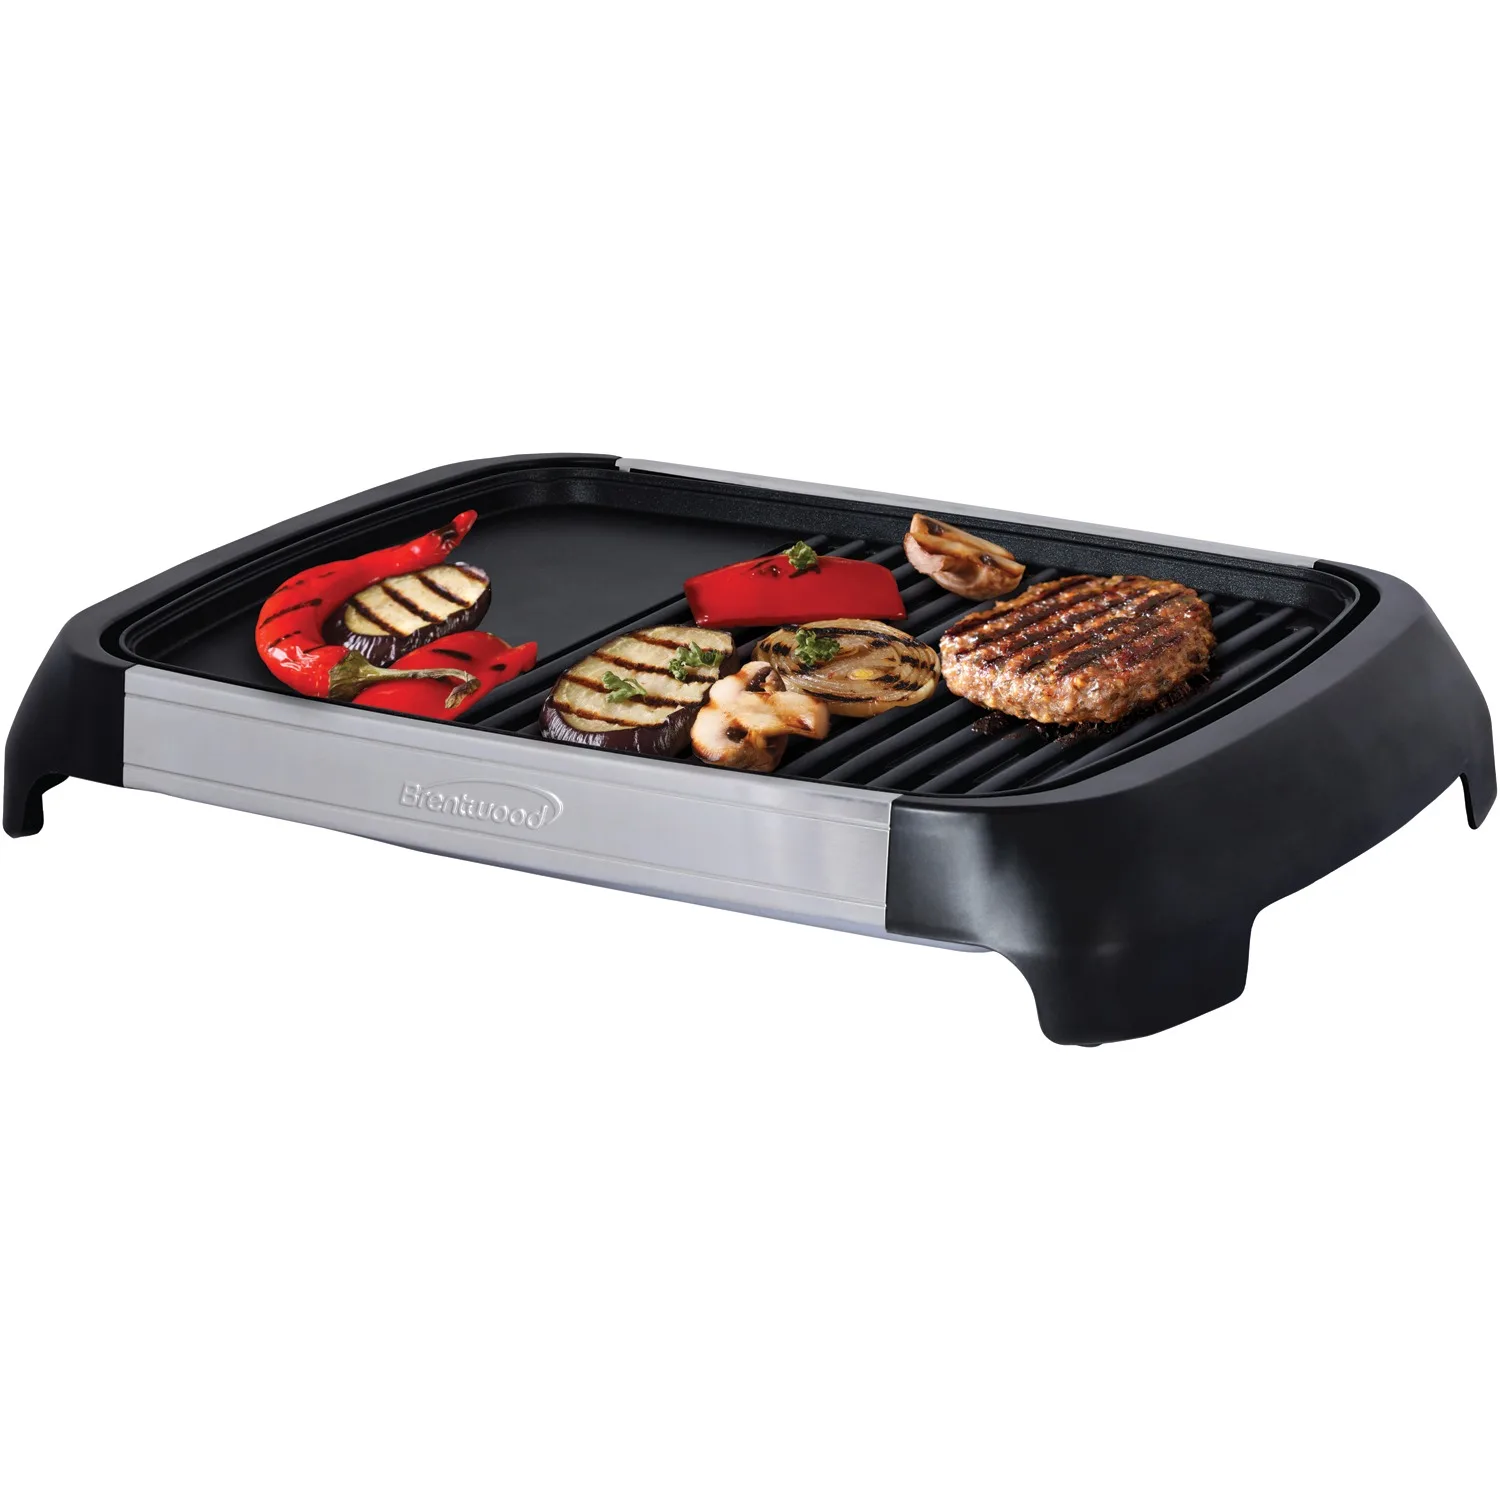 Ватт гриль. Stainless Steel Electric Griddle Grill. Brentwood select. Grill Fox.